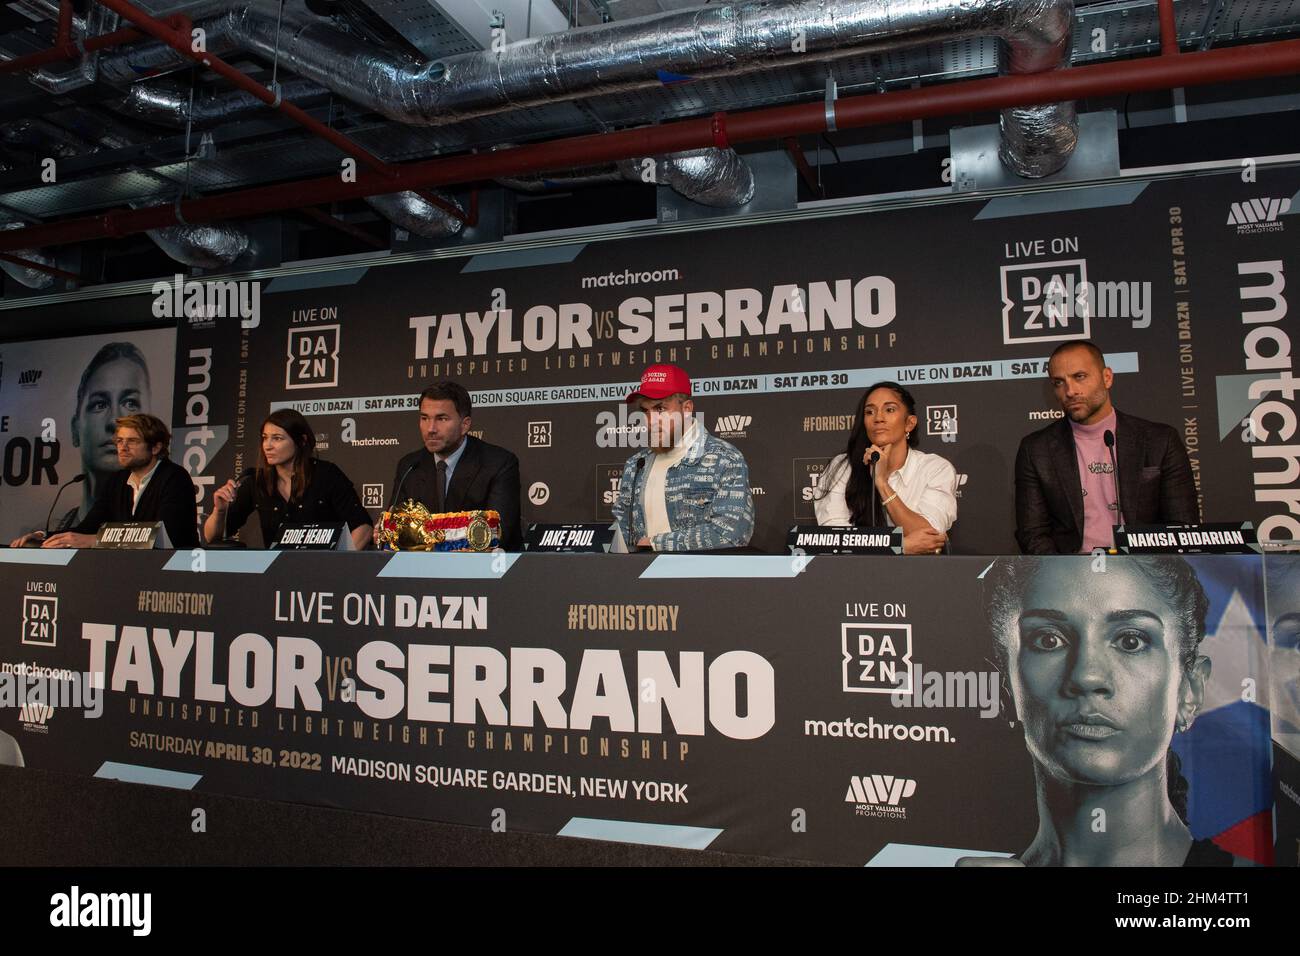 (left) to (right) Joseph Markowski EVP, DAZN, Katie Taylor undisputed World Lightweight champion, Eddie Hearn chairman, Matchroom Sport, Jake Paul co-founder of Most Valuable Promotions, professional boxer and content creator, Amanda Serrano seven-weight World champion and Nakisa Bidarian co-founder of Most Valuable Promotions during the press conference ahead of the Katie Taylor v Amanda Serrano fight at Madison Square Gardens in April 2022, at Landing Forty Two, The Leadenhall Building, England on the 7 February 2022. Photo by Alan Stanford. Stock Photo